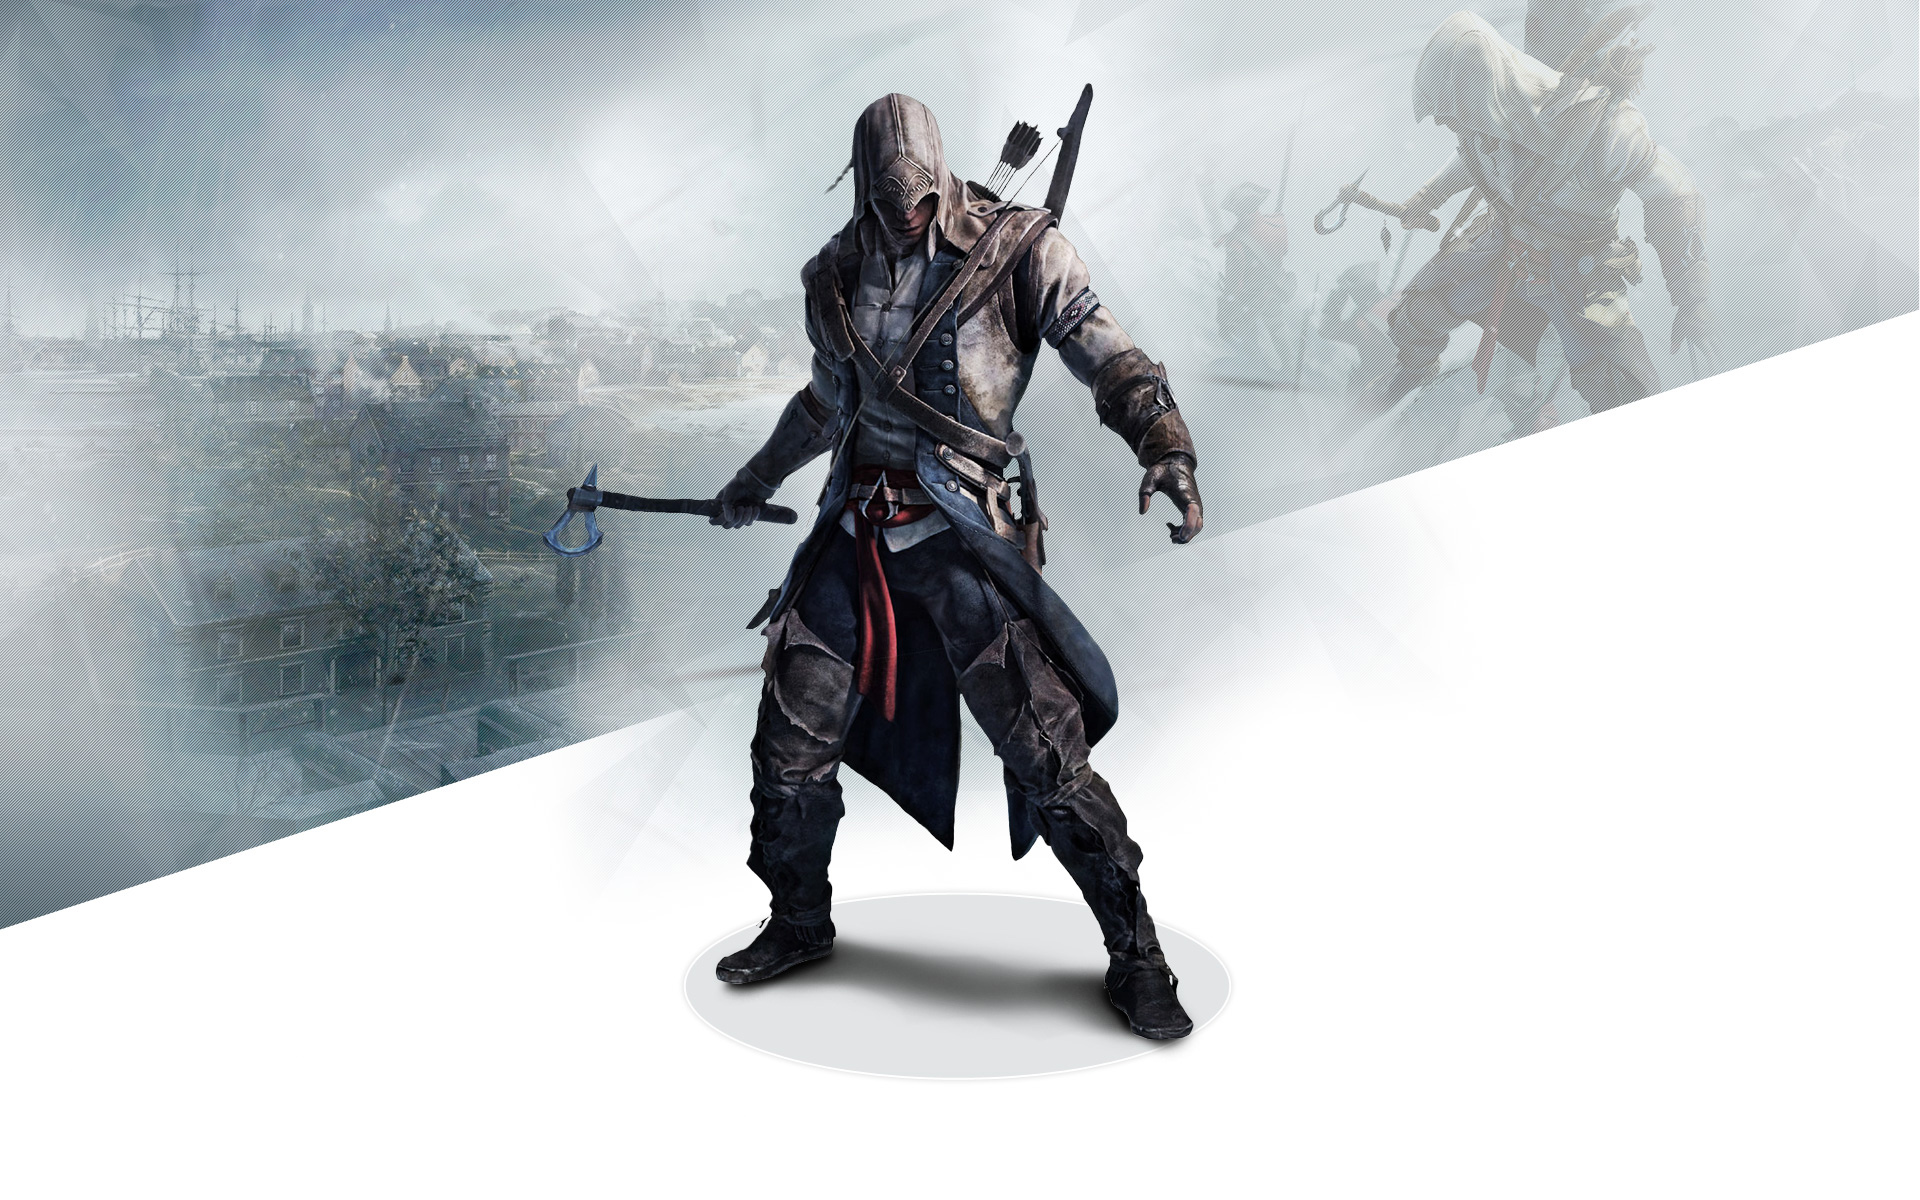 Assassin’s Creed: Altaïr’s Chronicles